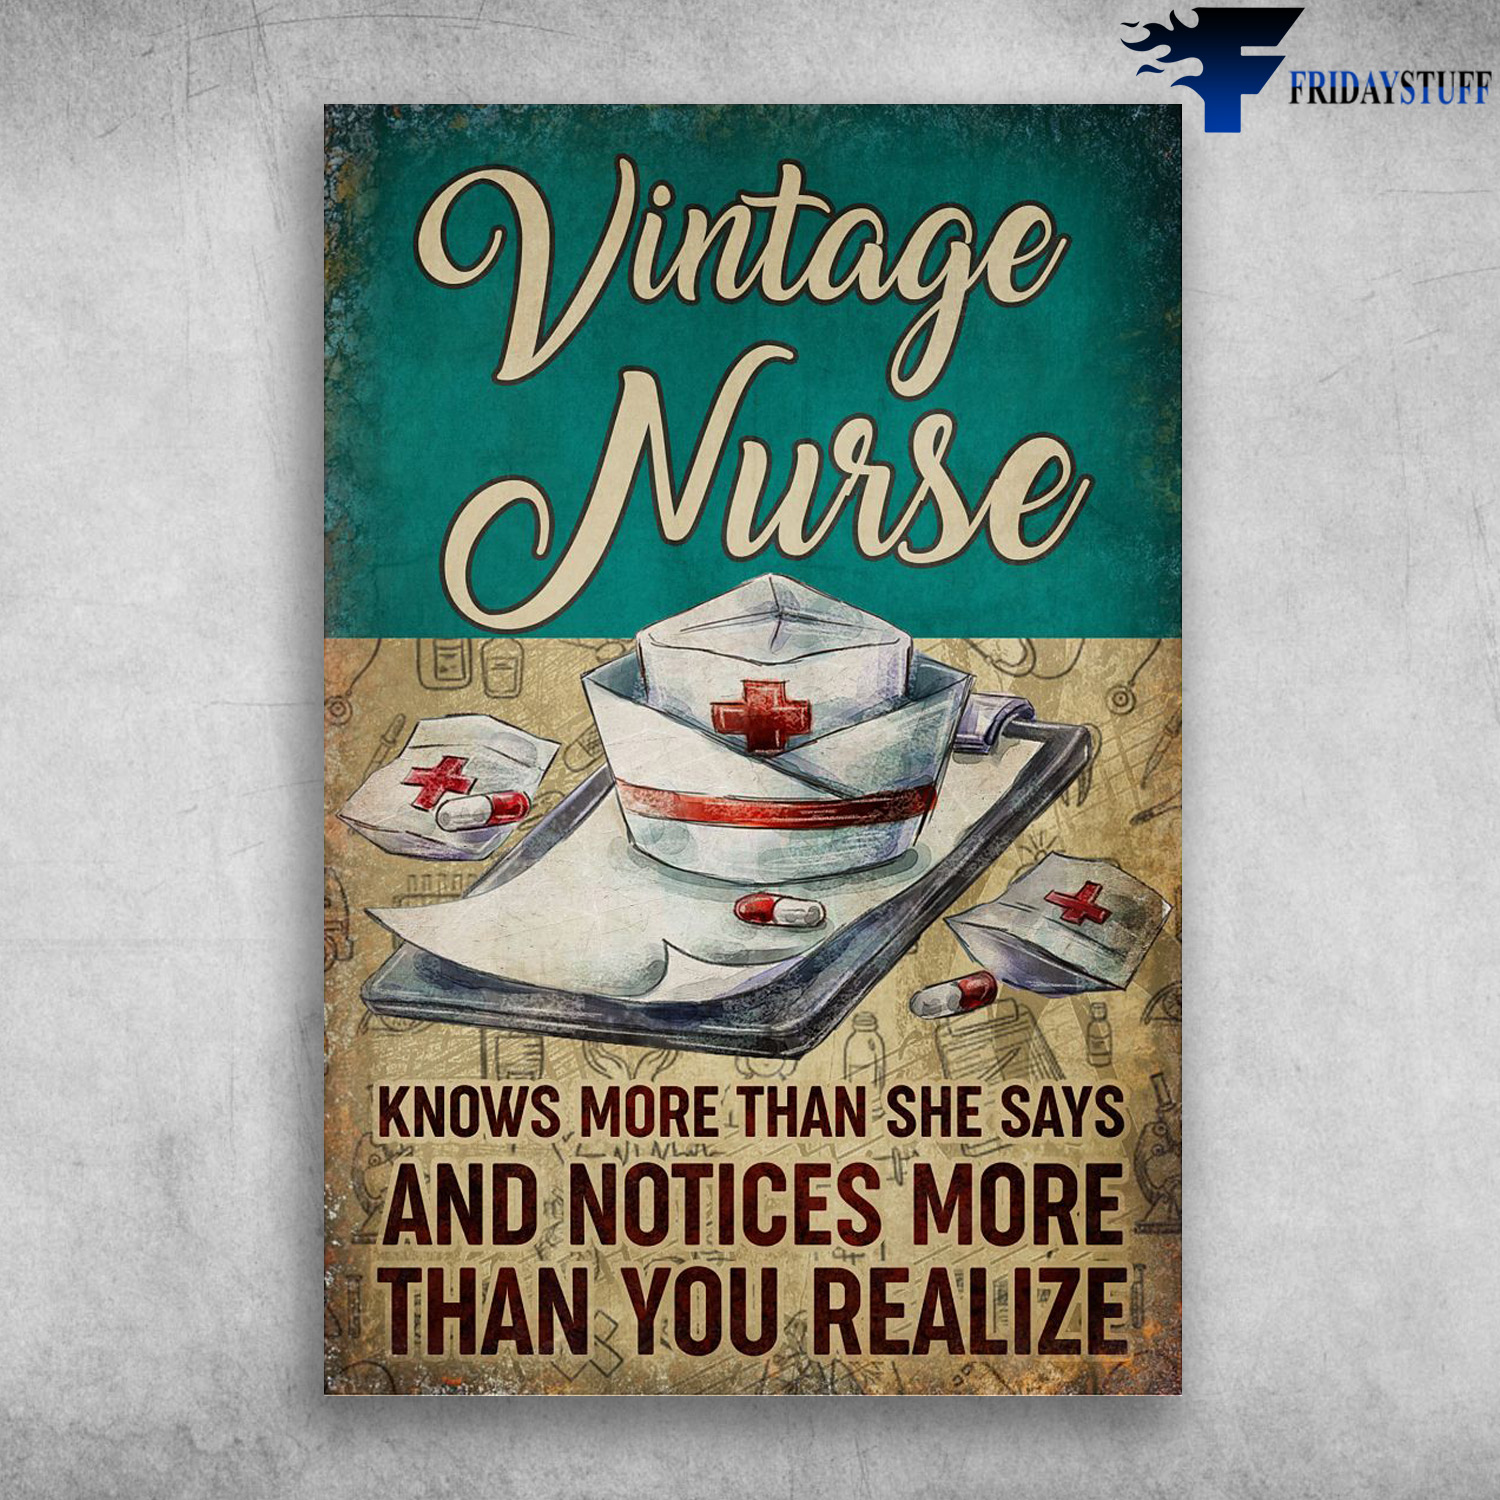 Vintage Nurse - Knows More Than She Says, And Notices More Than You Realize